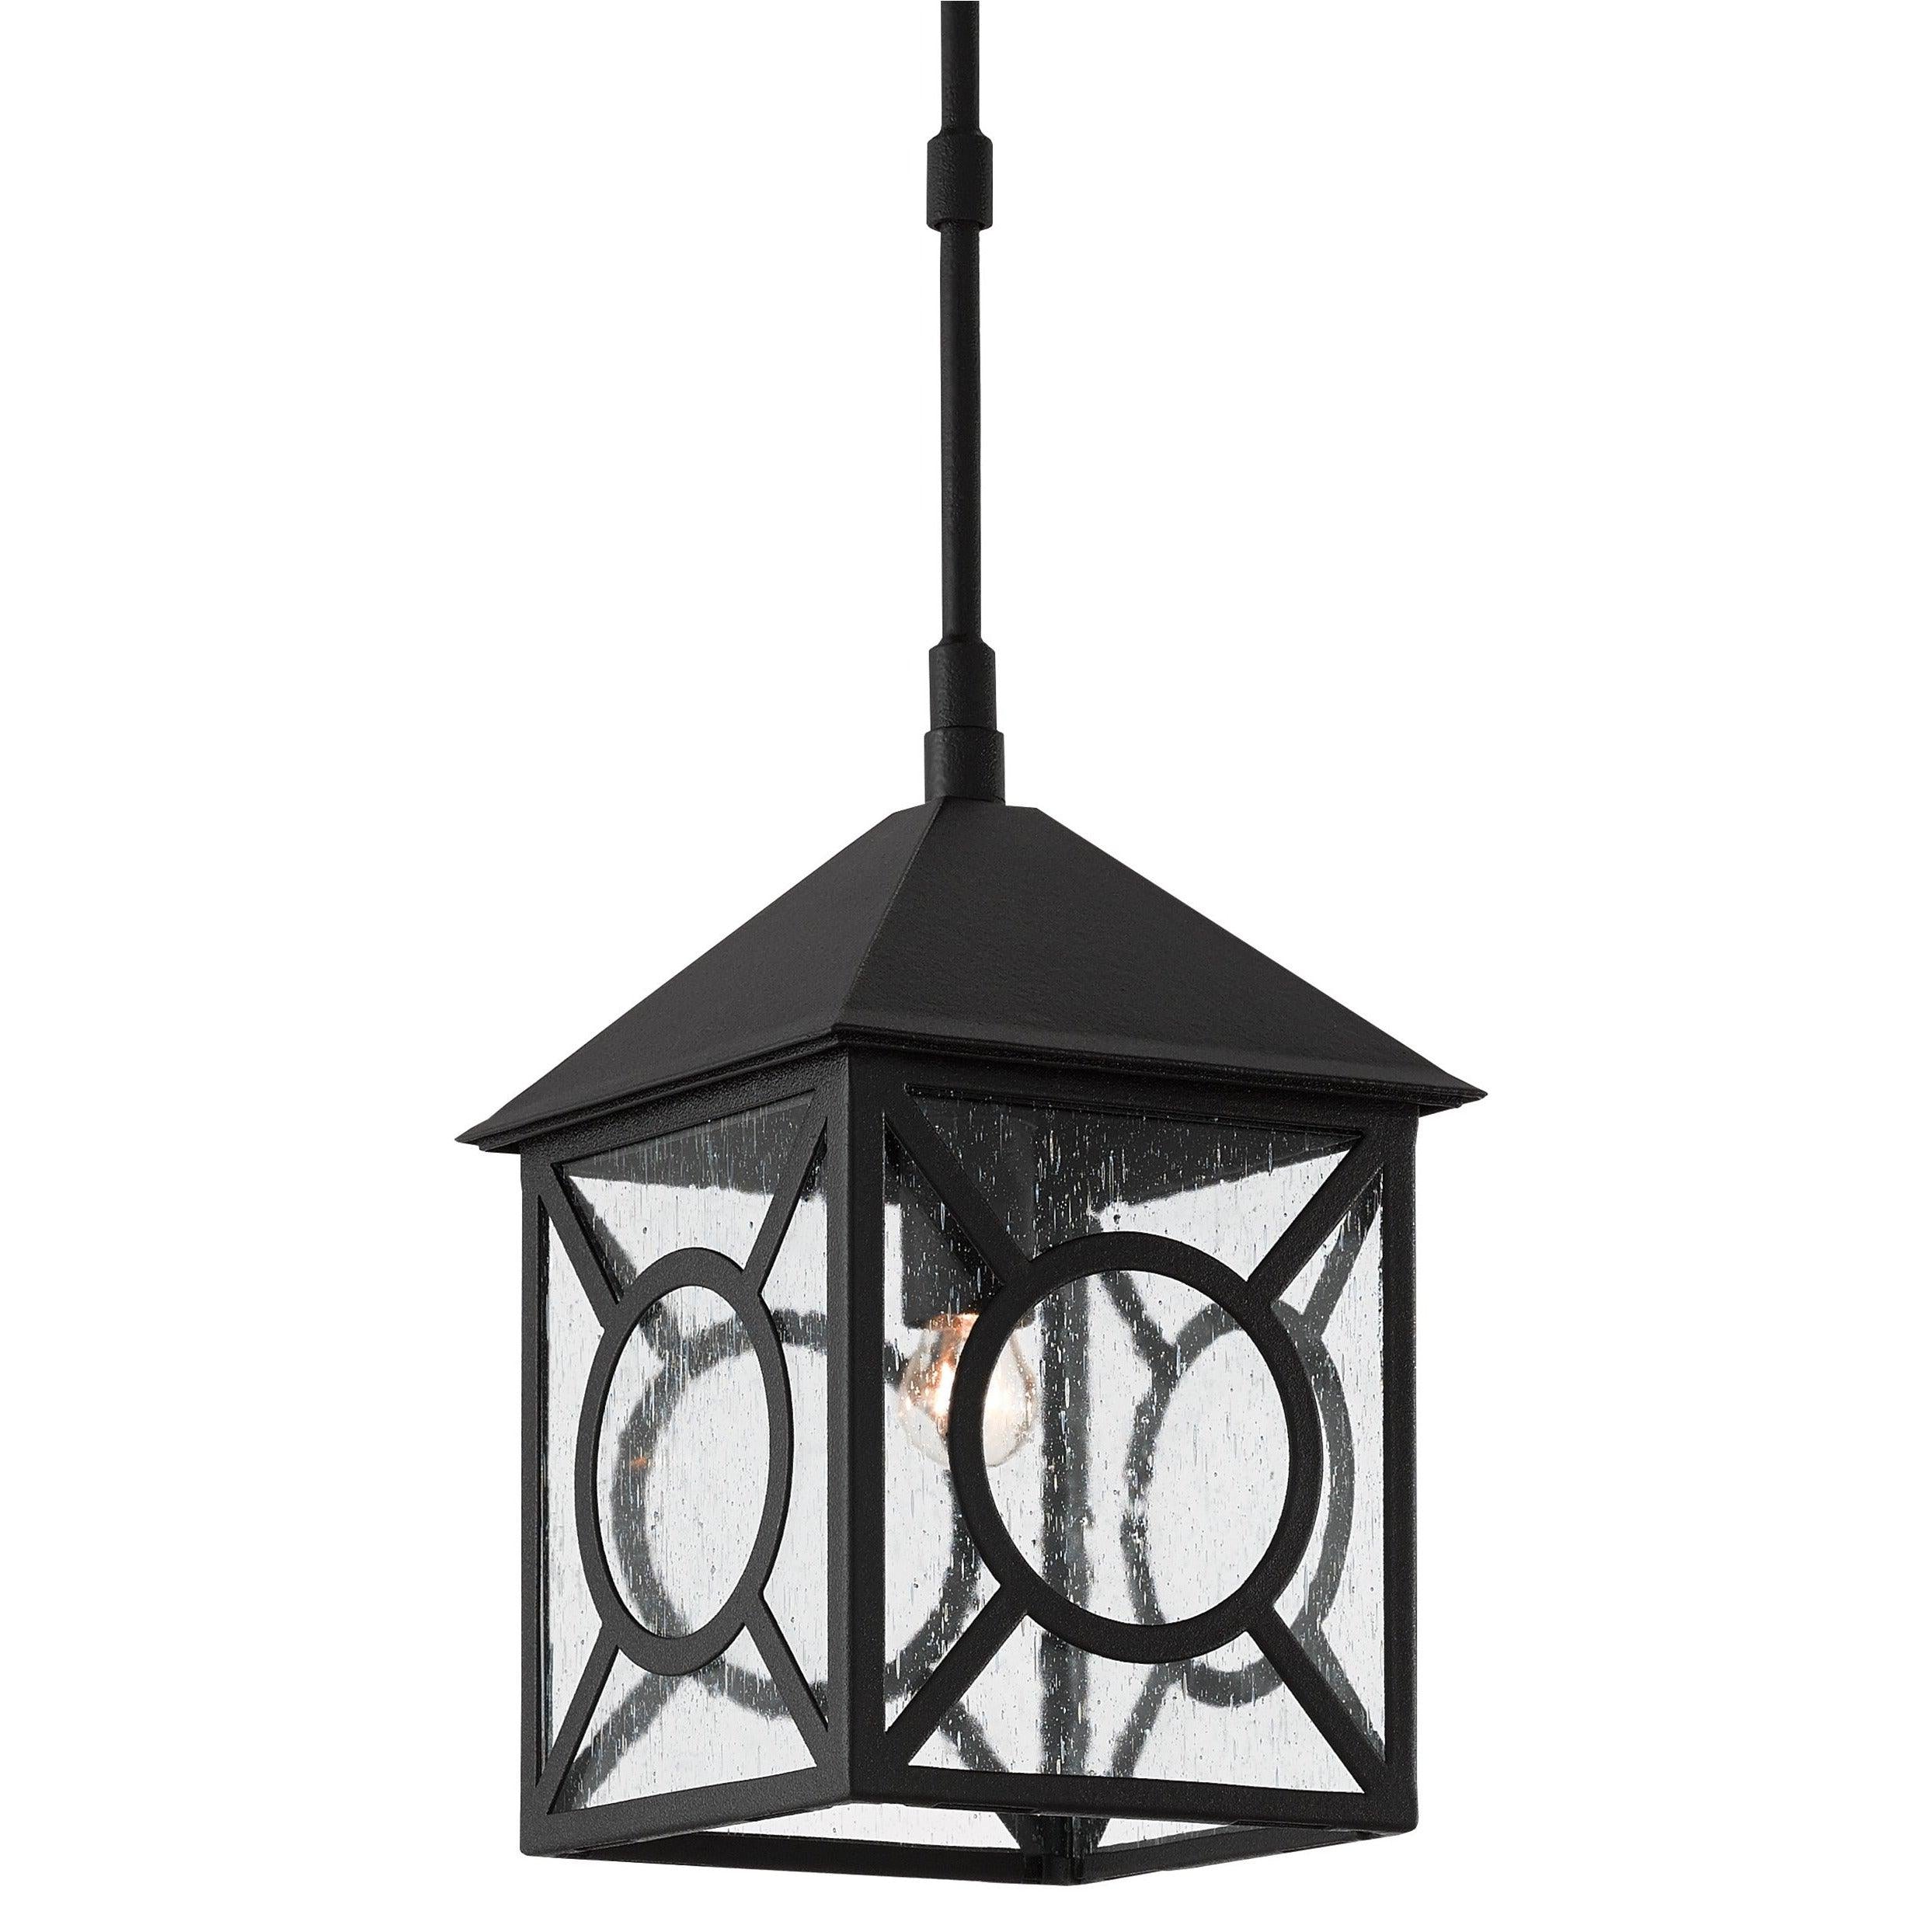 Currey and Company - Ripley Outdoor Lantern - 9500-0007 | Montreal Lighting & Hardware